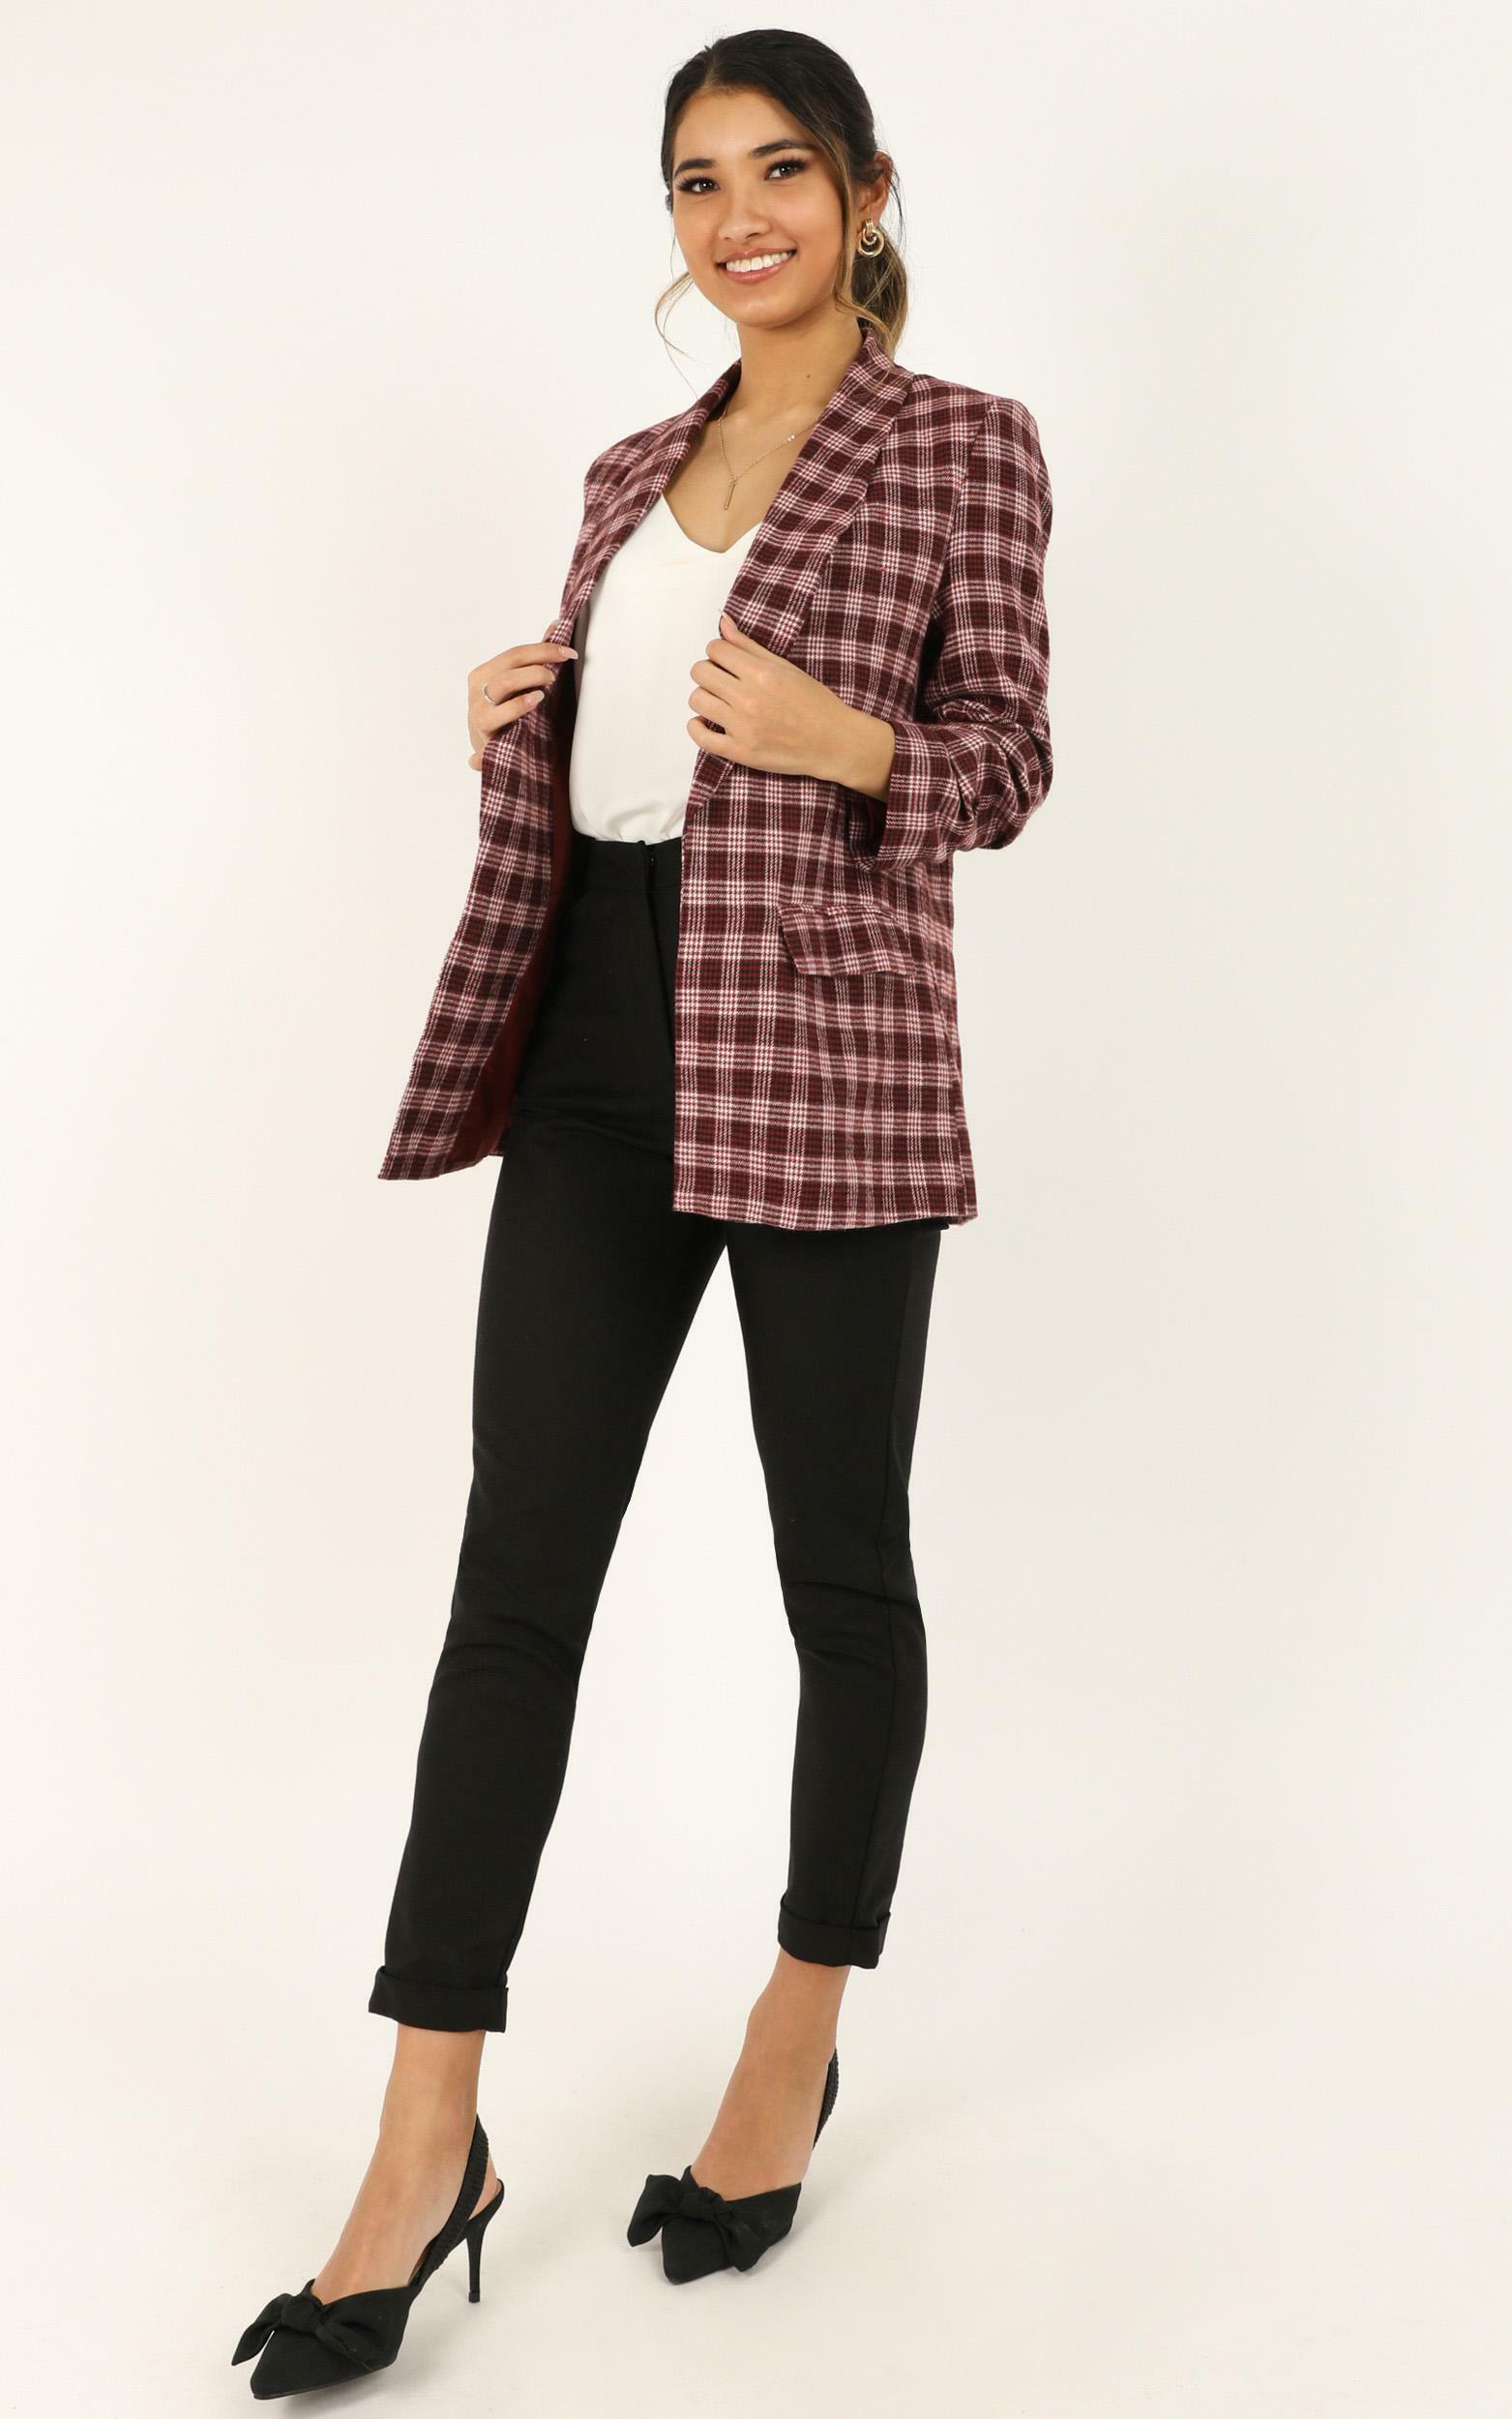 Late To Work Blazer In wine check - 18 (XXXL), Wine, hi-res image number null